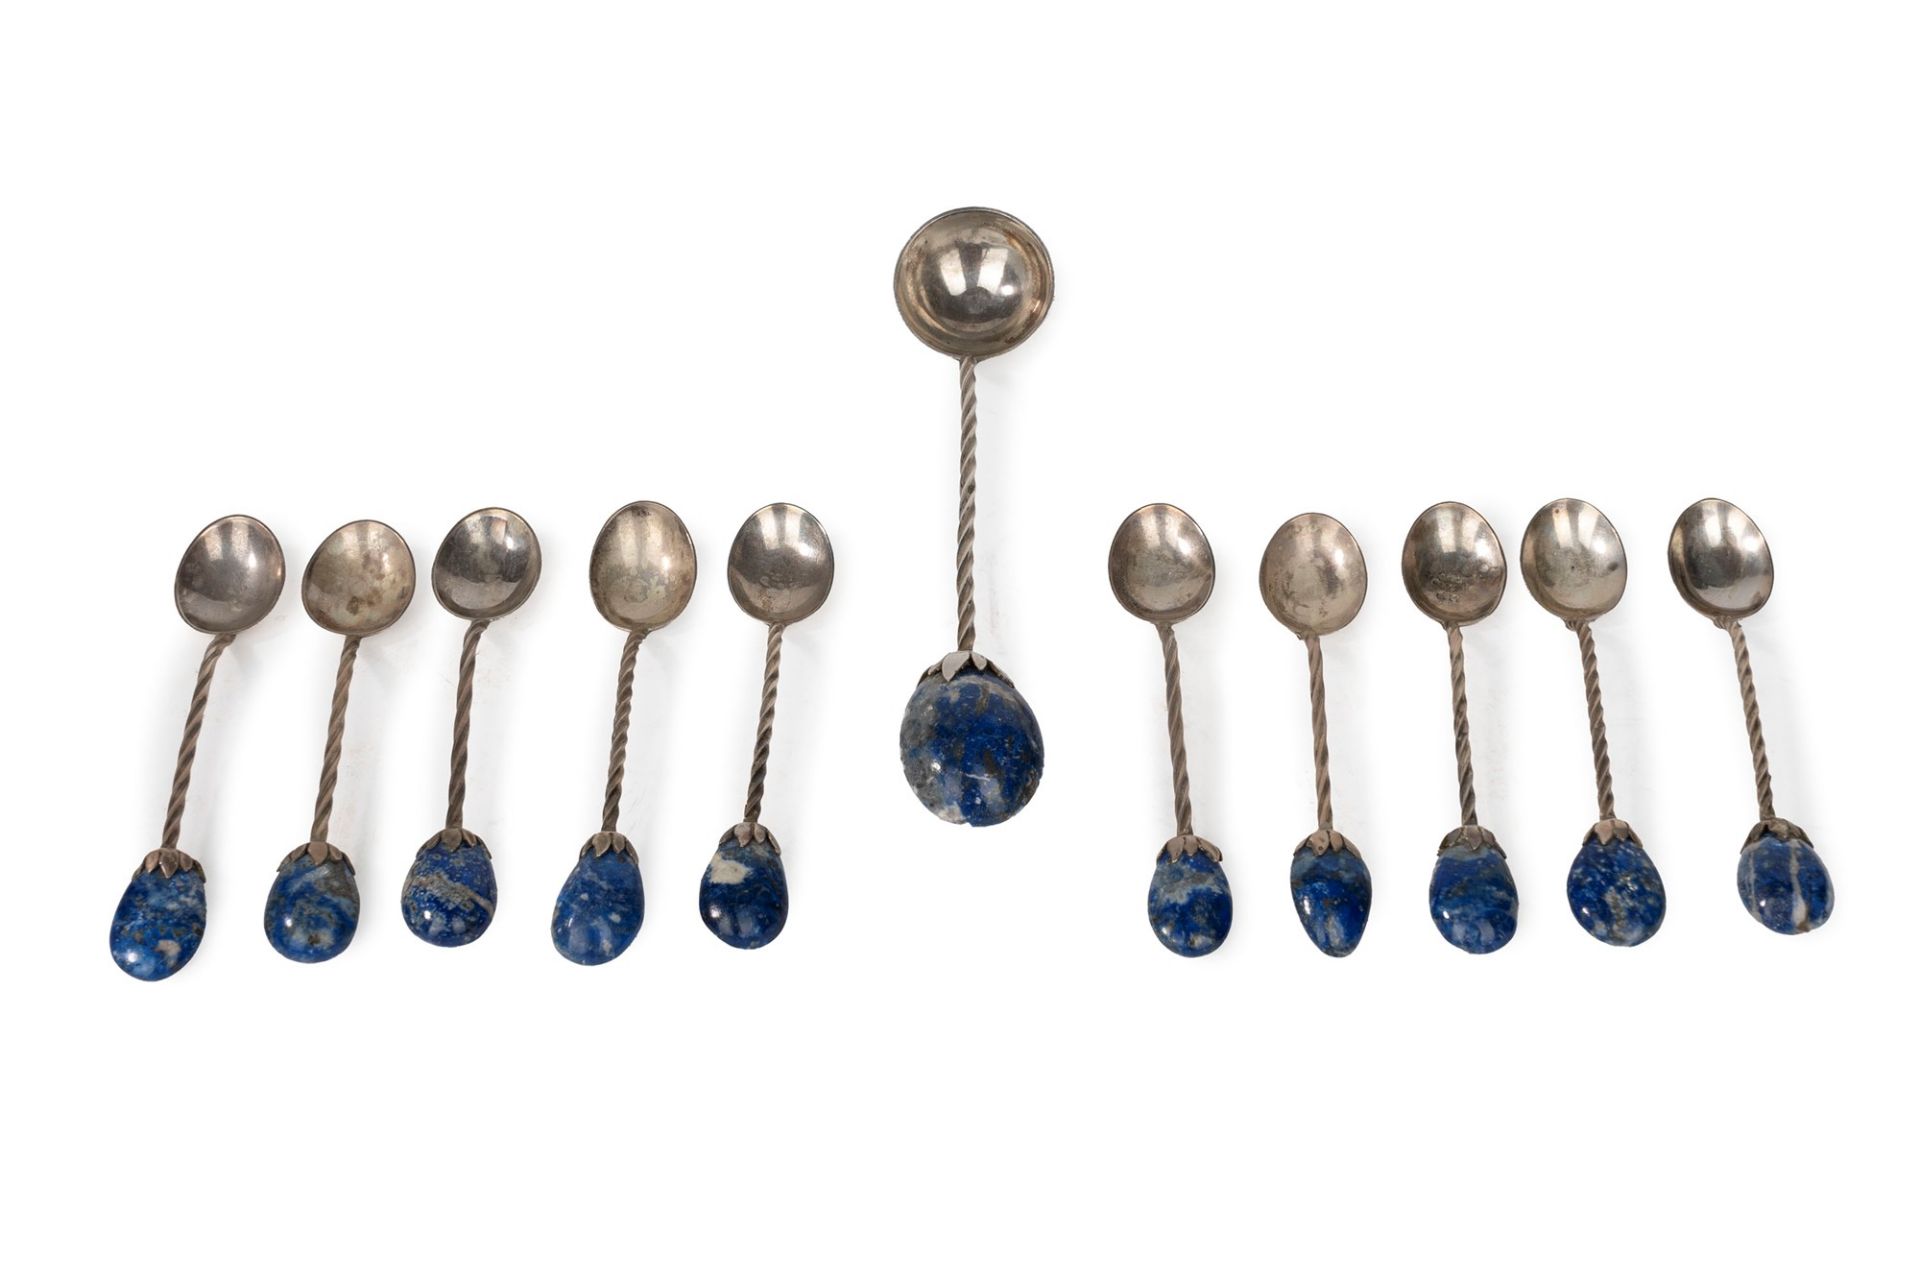 Eleven teaspoons and a small ladle in silver and lapis lazuli, 17th century - Image 2 of 2